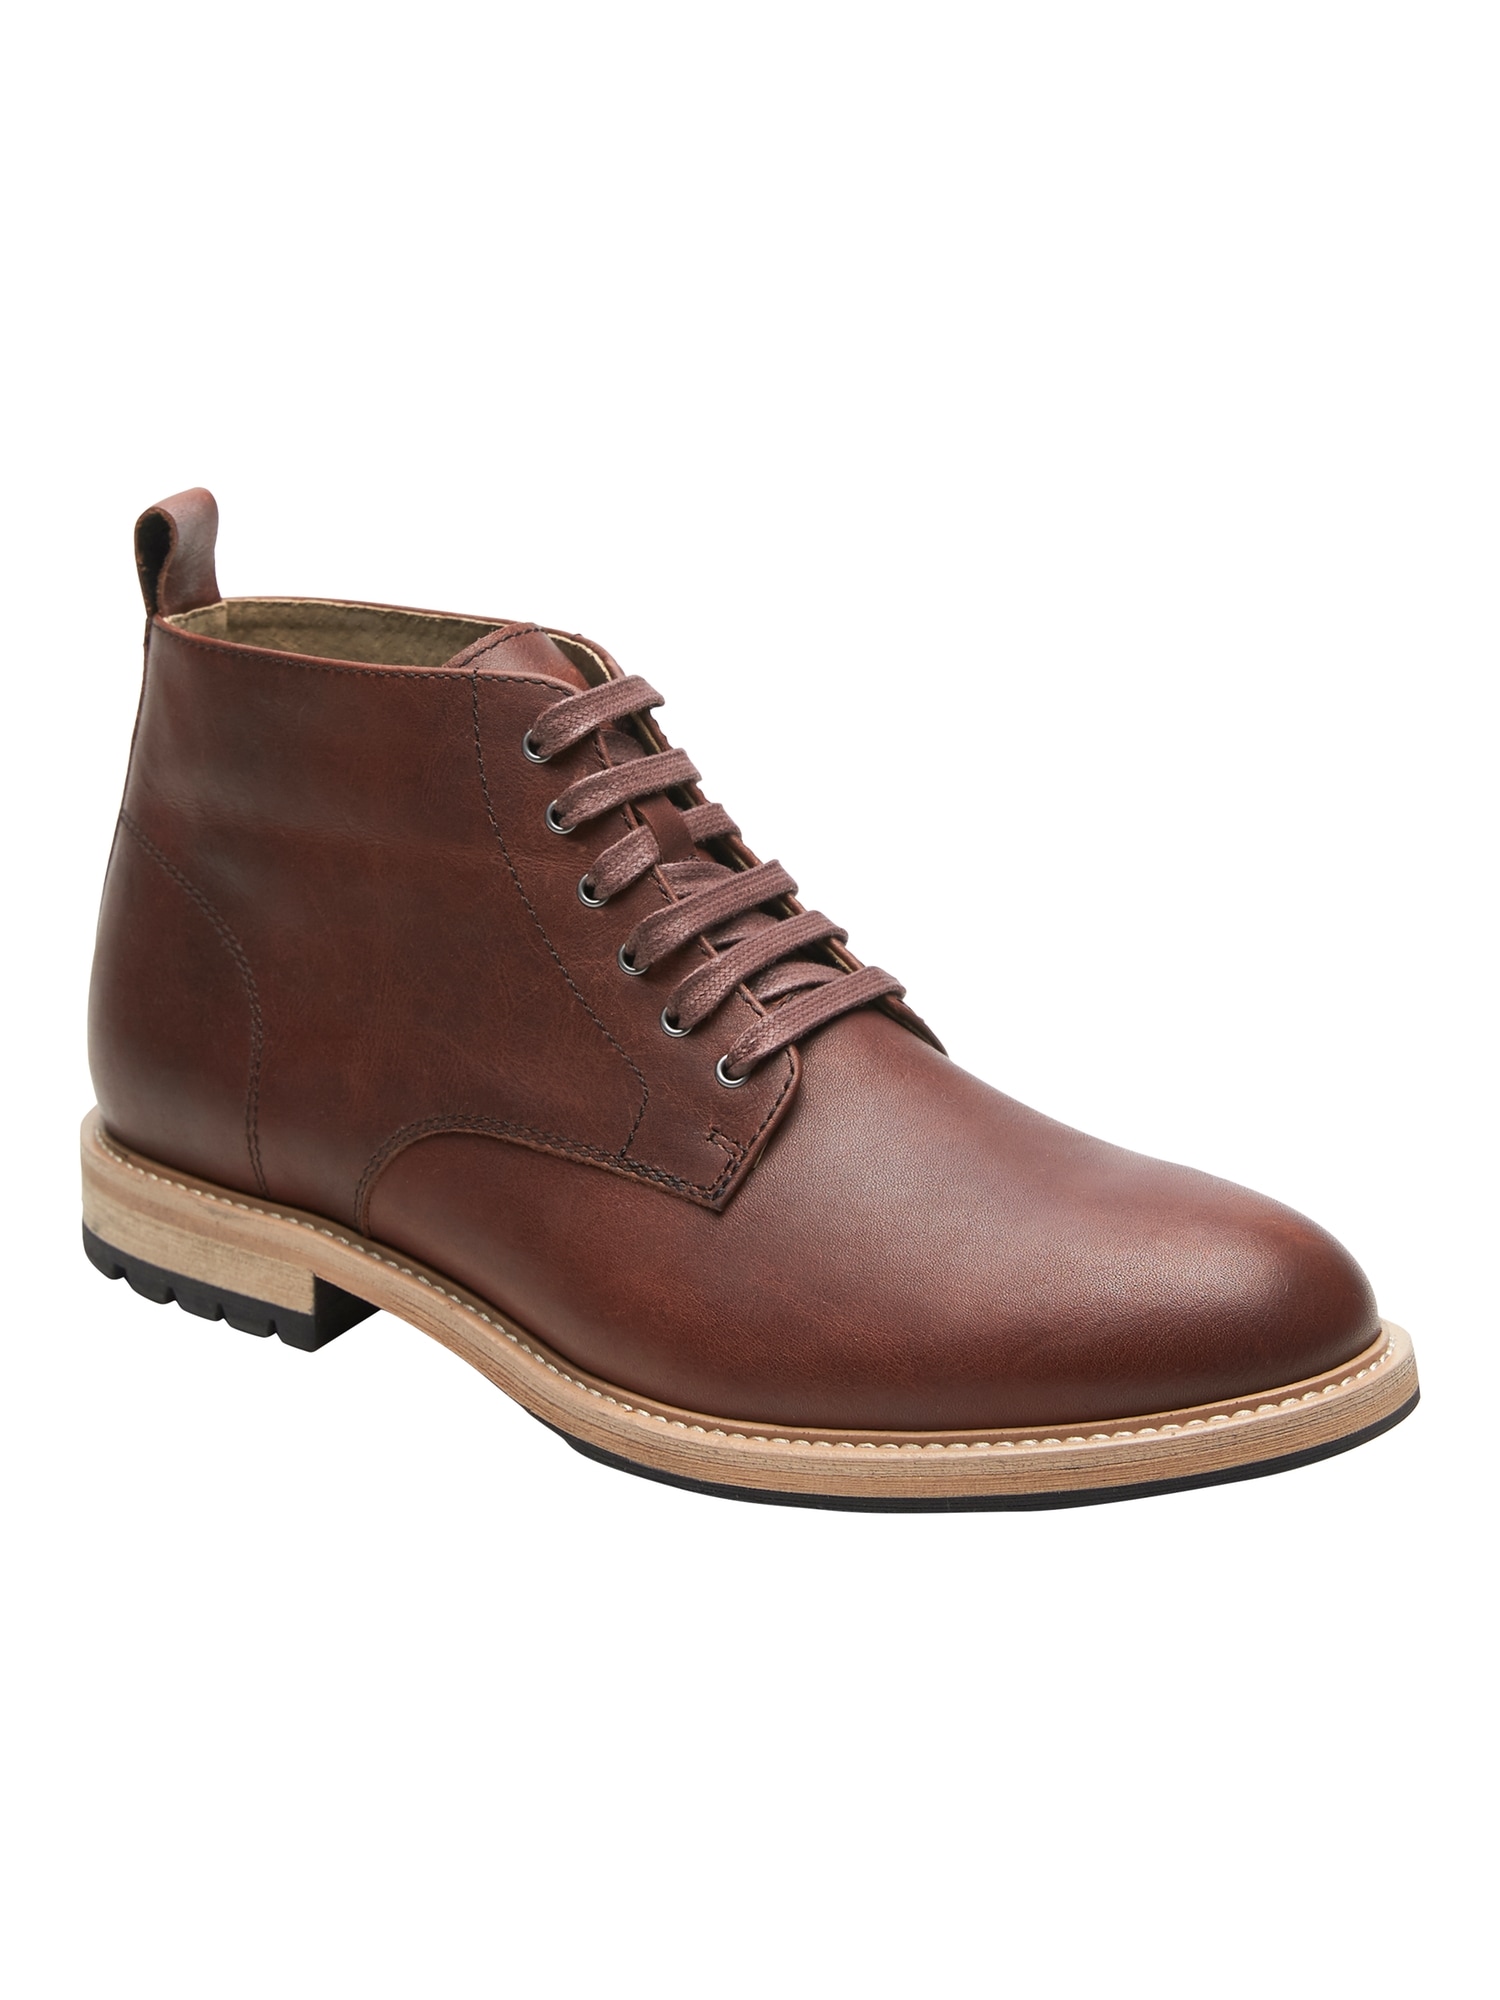 Arley Leather Work Boot